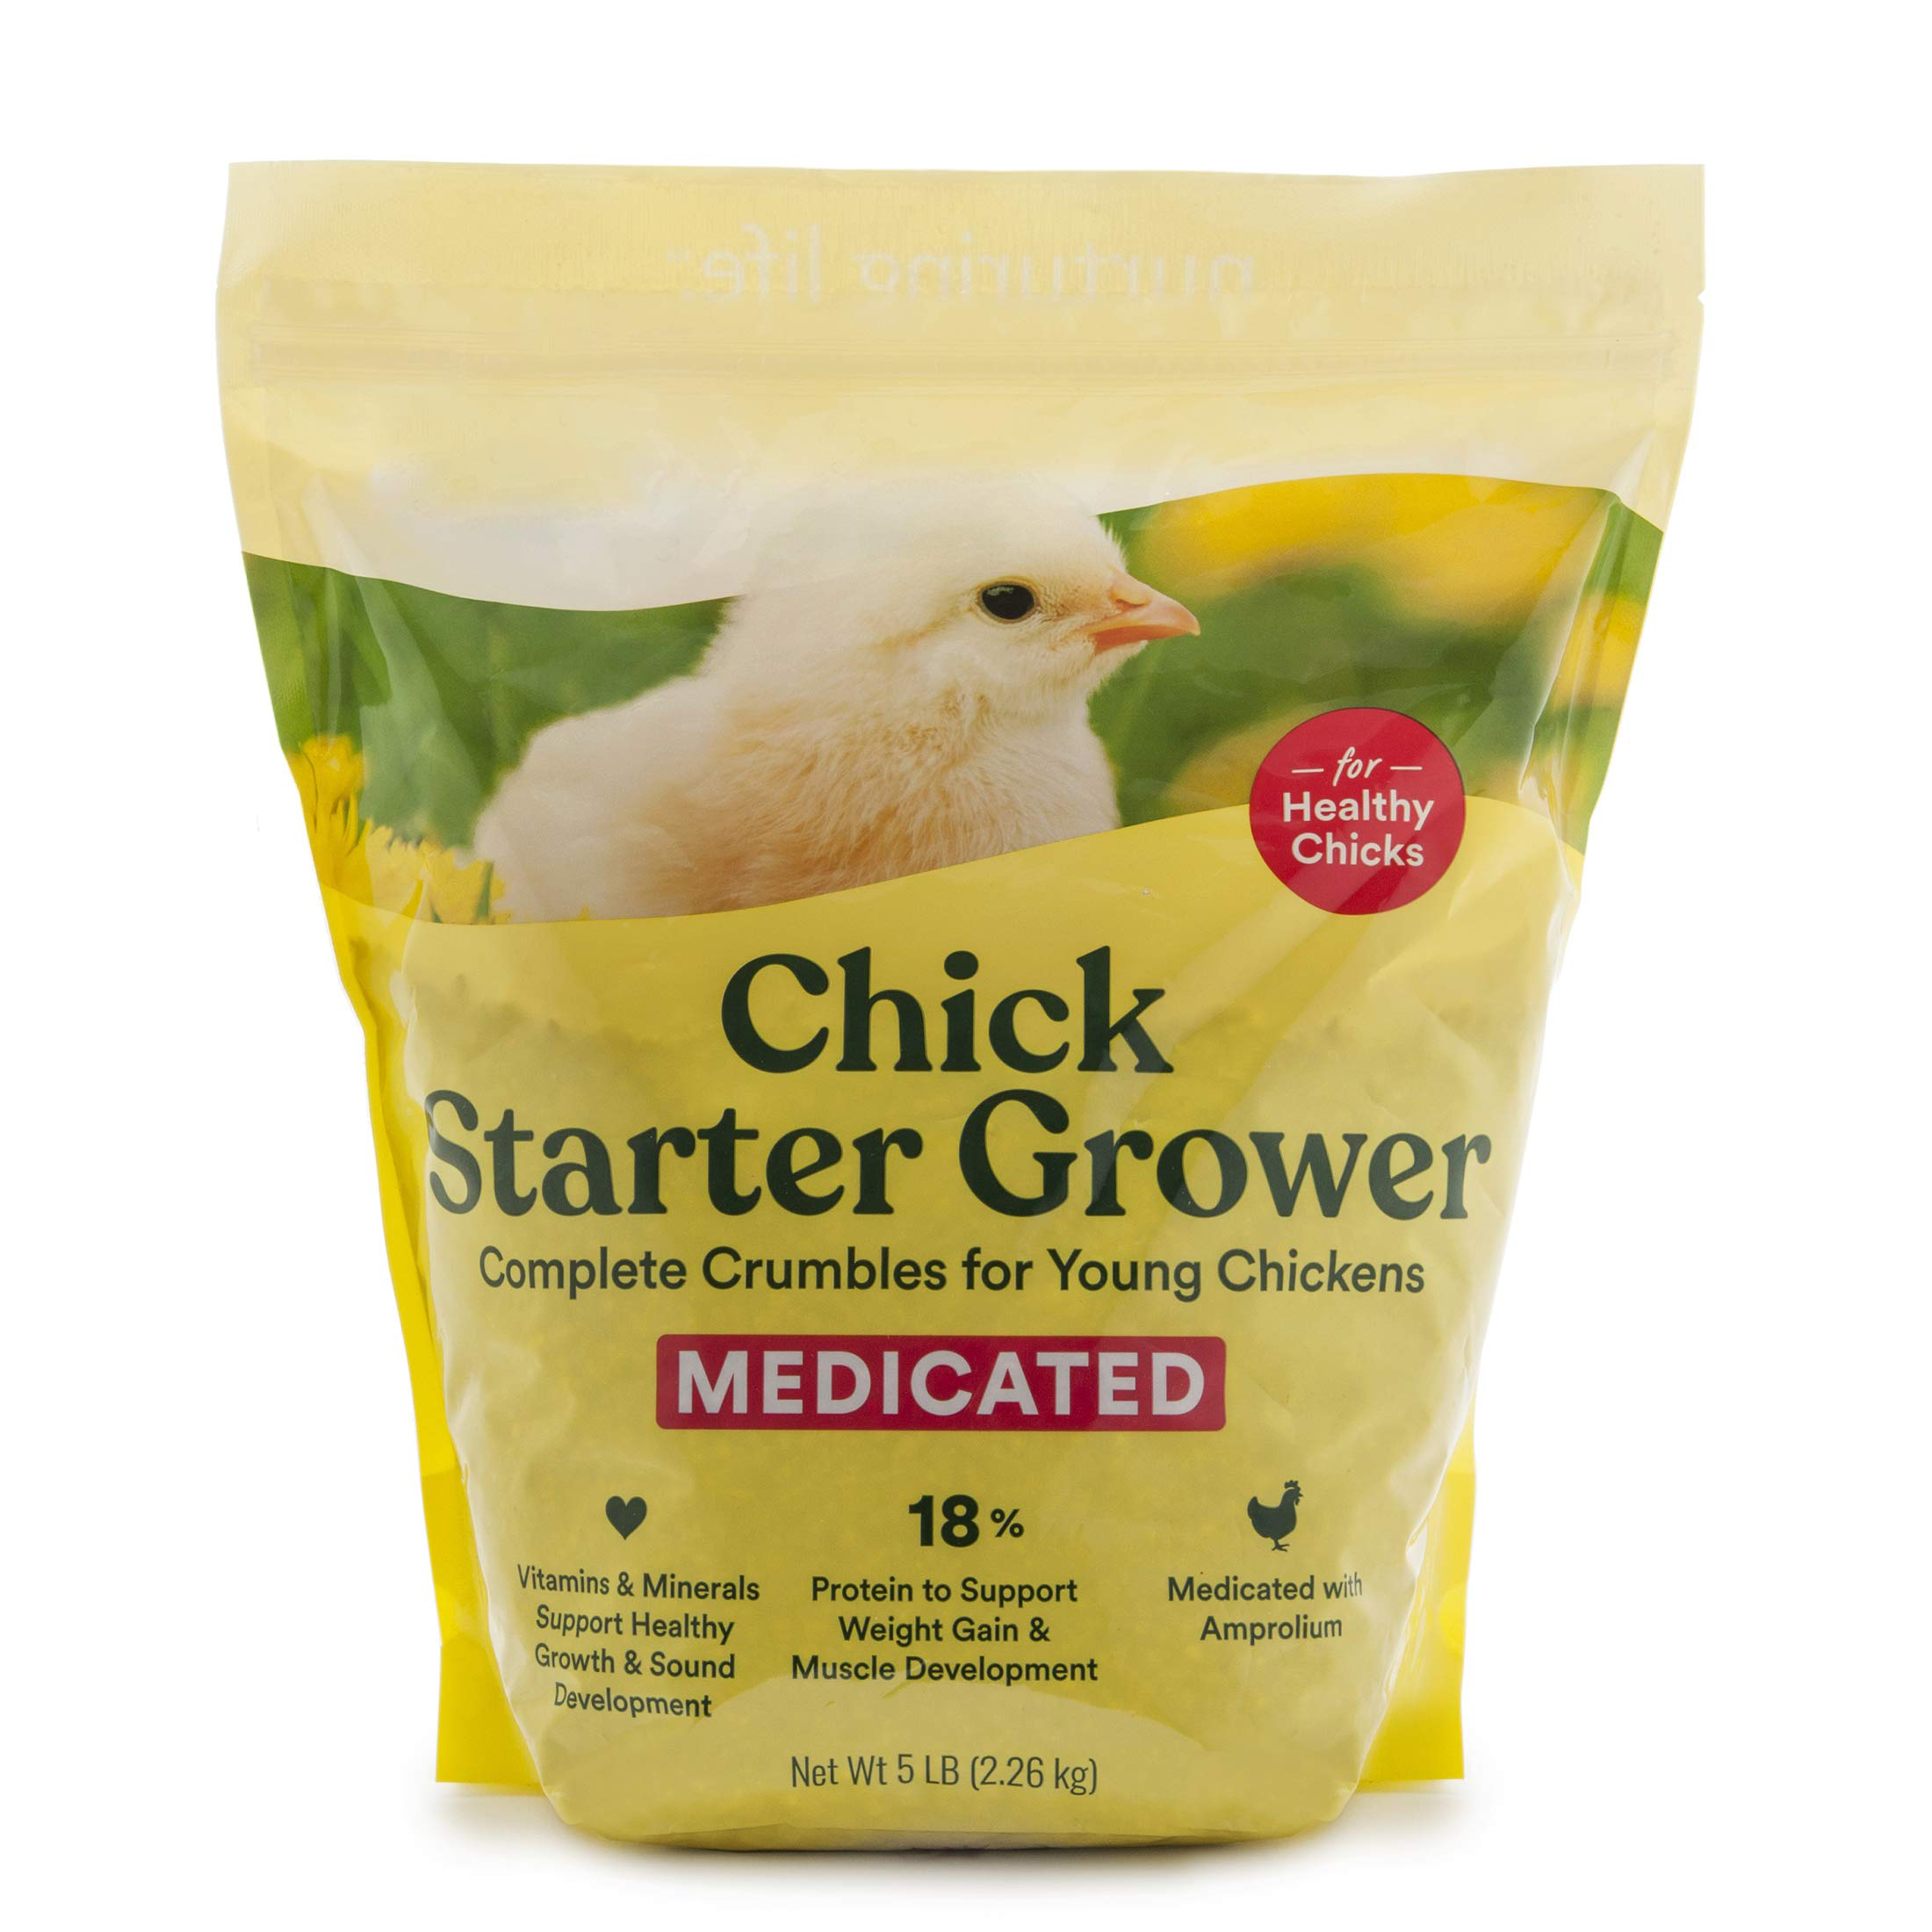 Medicated Chick Feed Crumble for Young Chickens - Formulated with Amprolium - 5 lbs